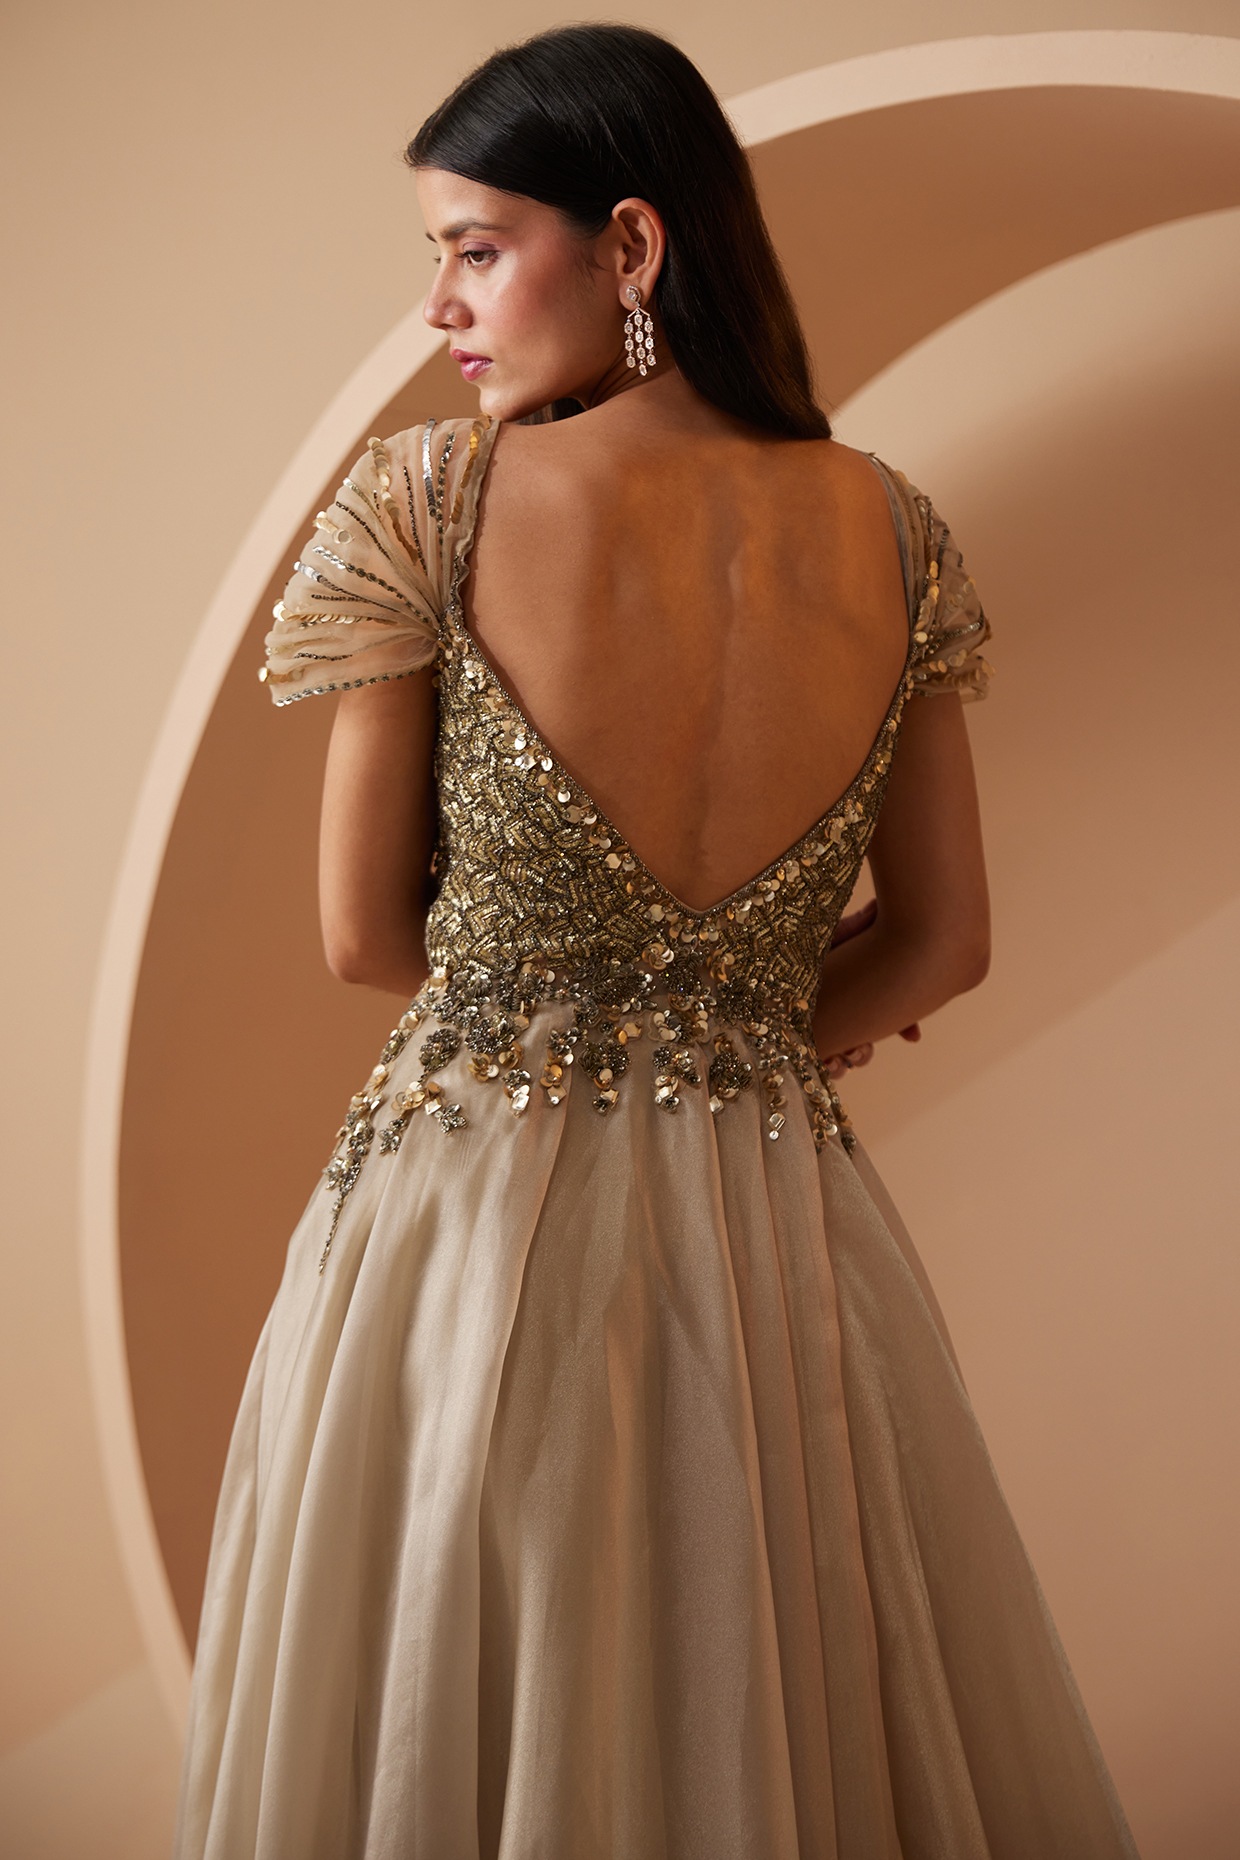 Straight Prom Dresses Page 6 - Formal Approach